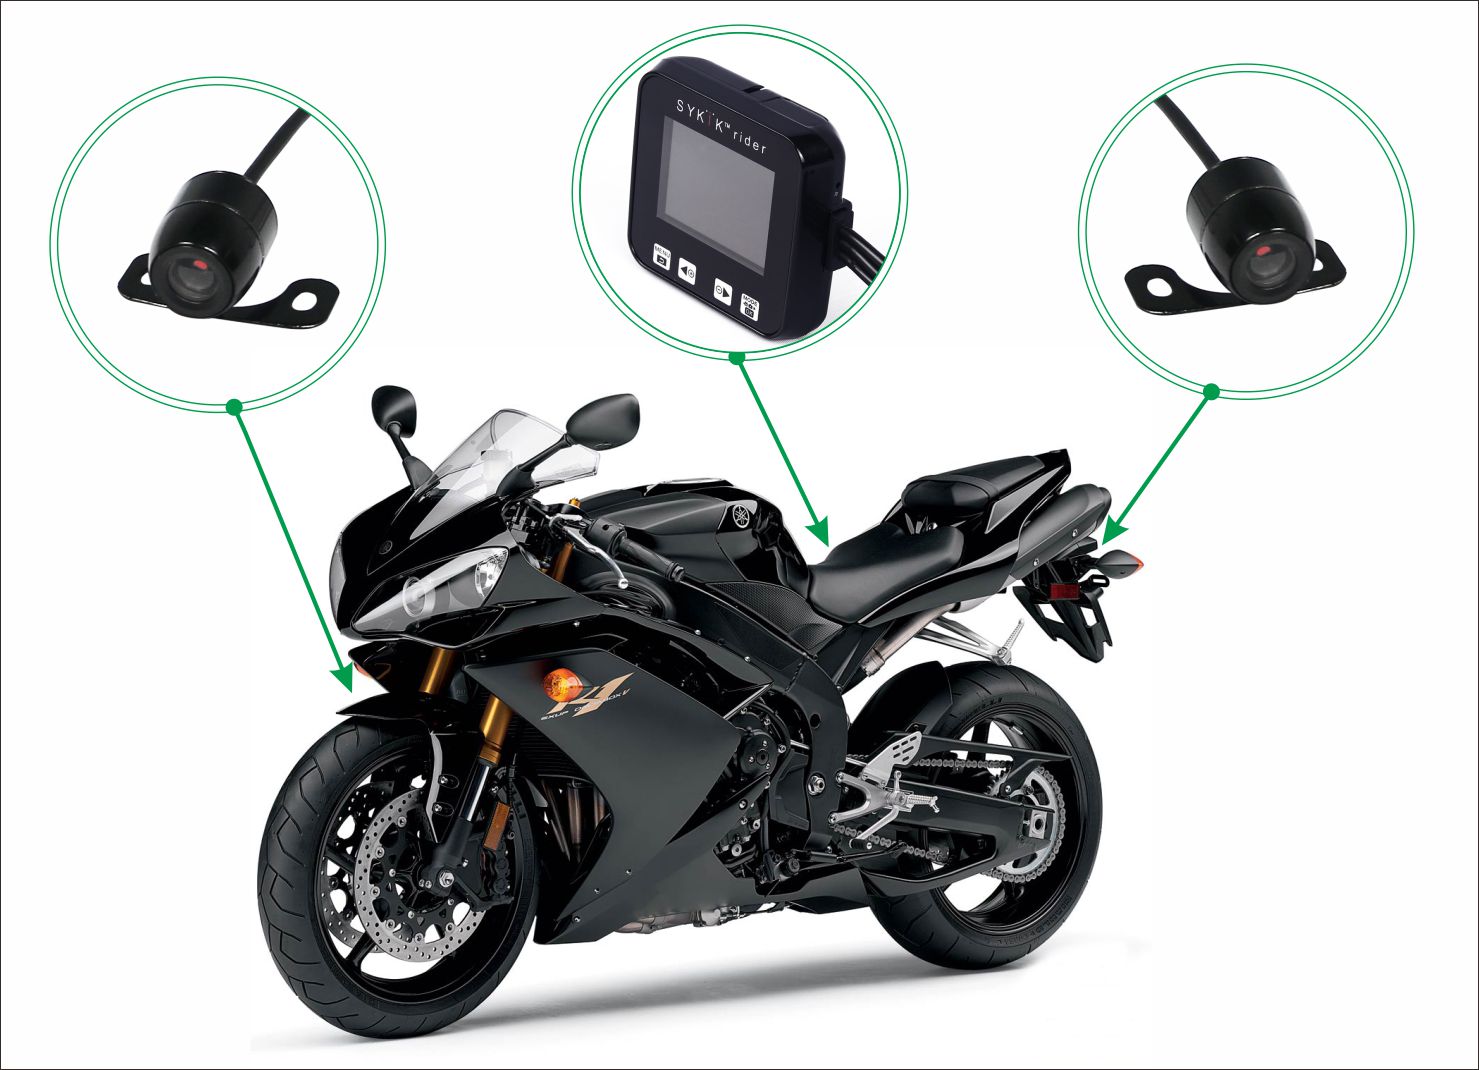 Sykik Rider CR1 Motorcycle Camera with Smart Park